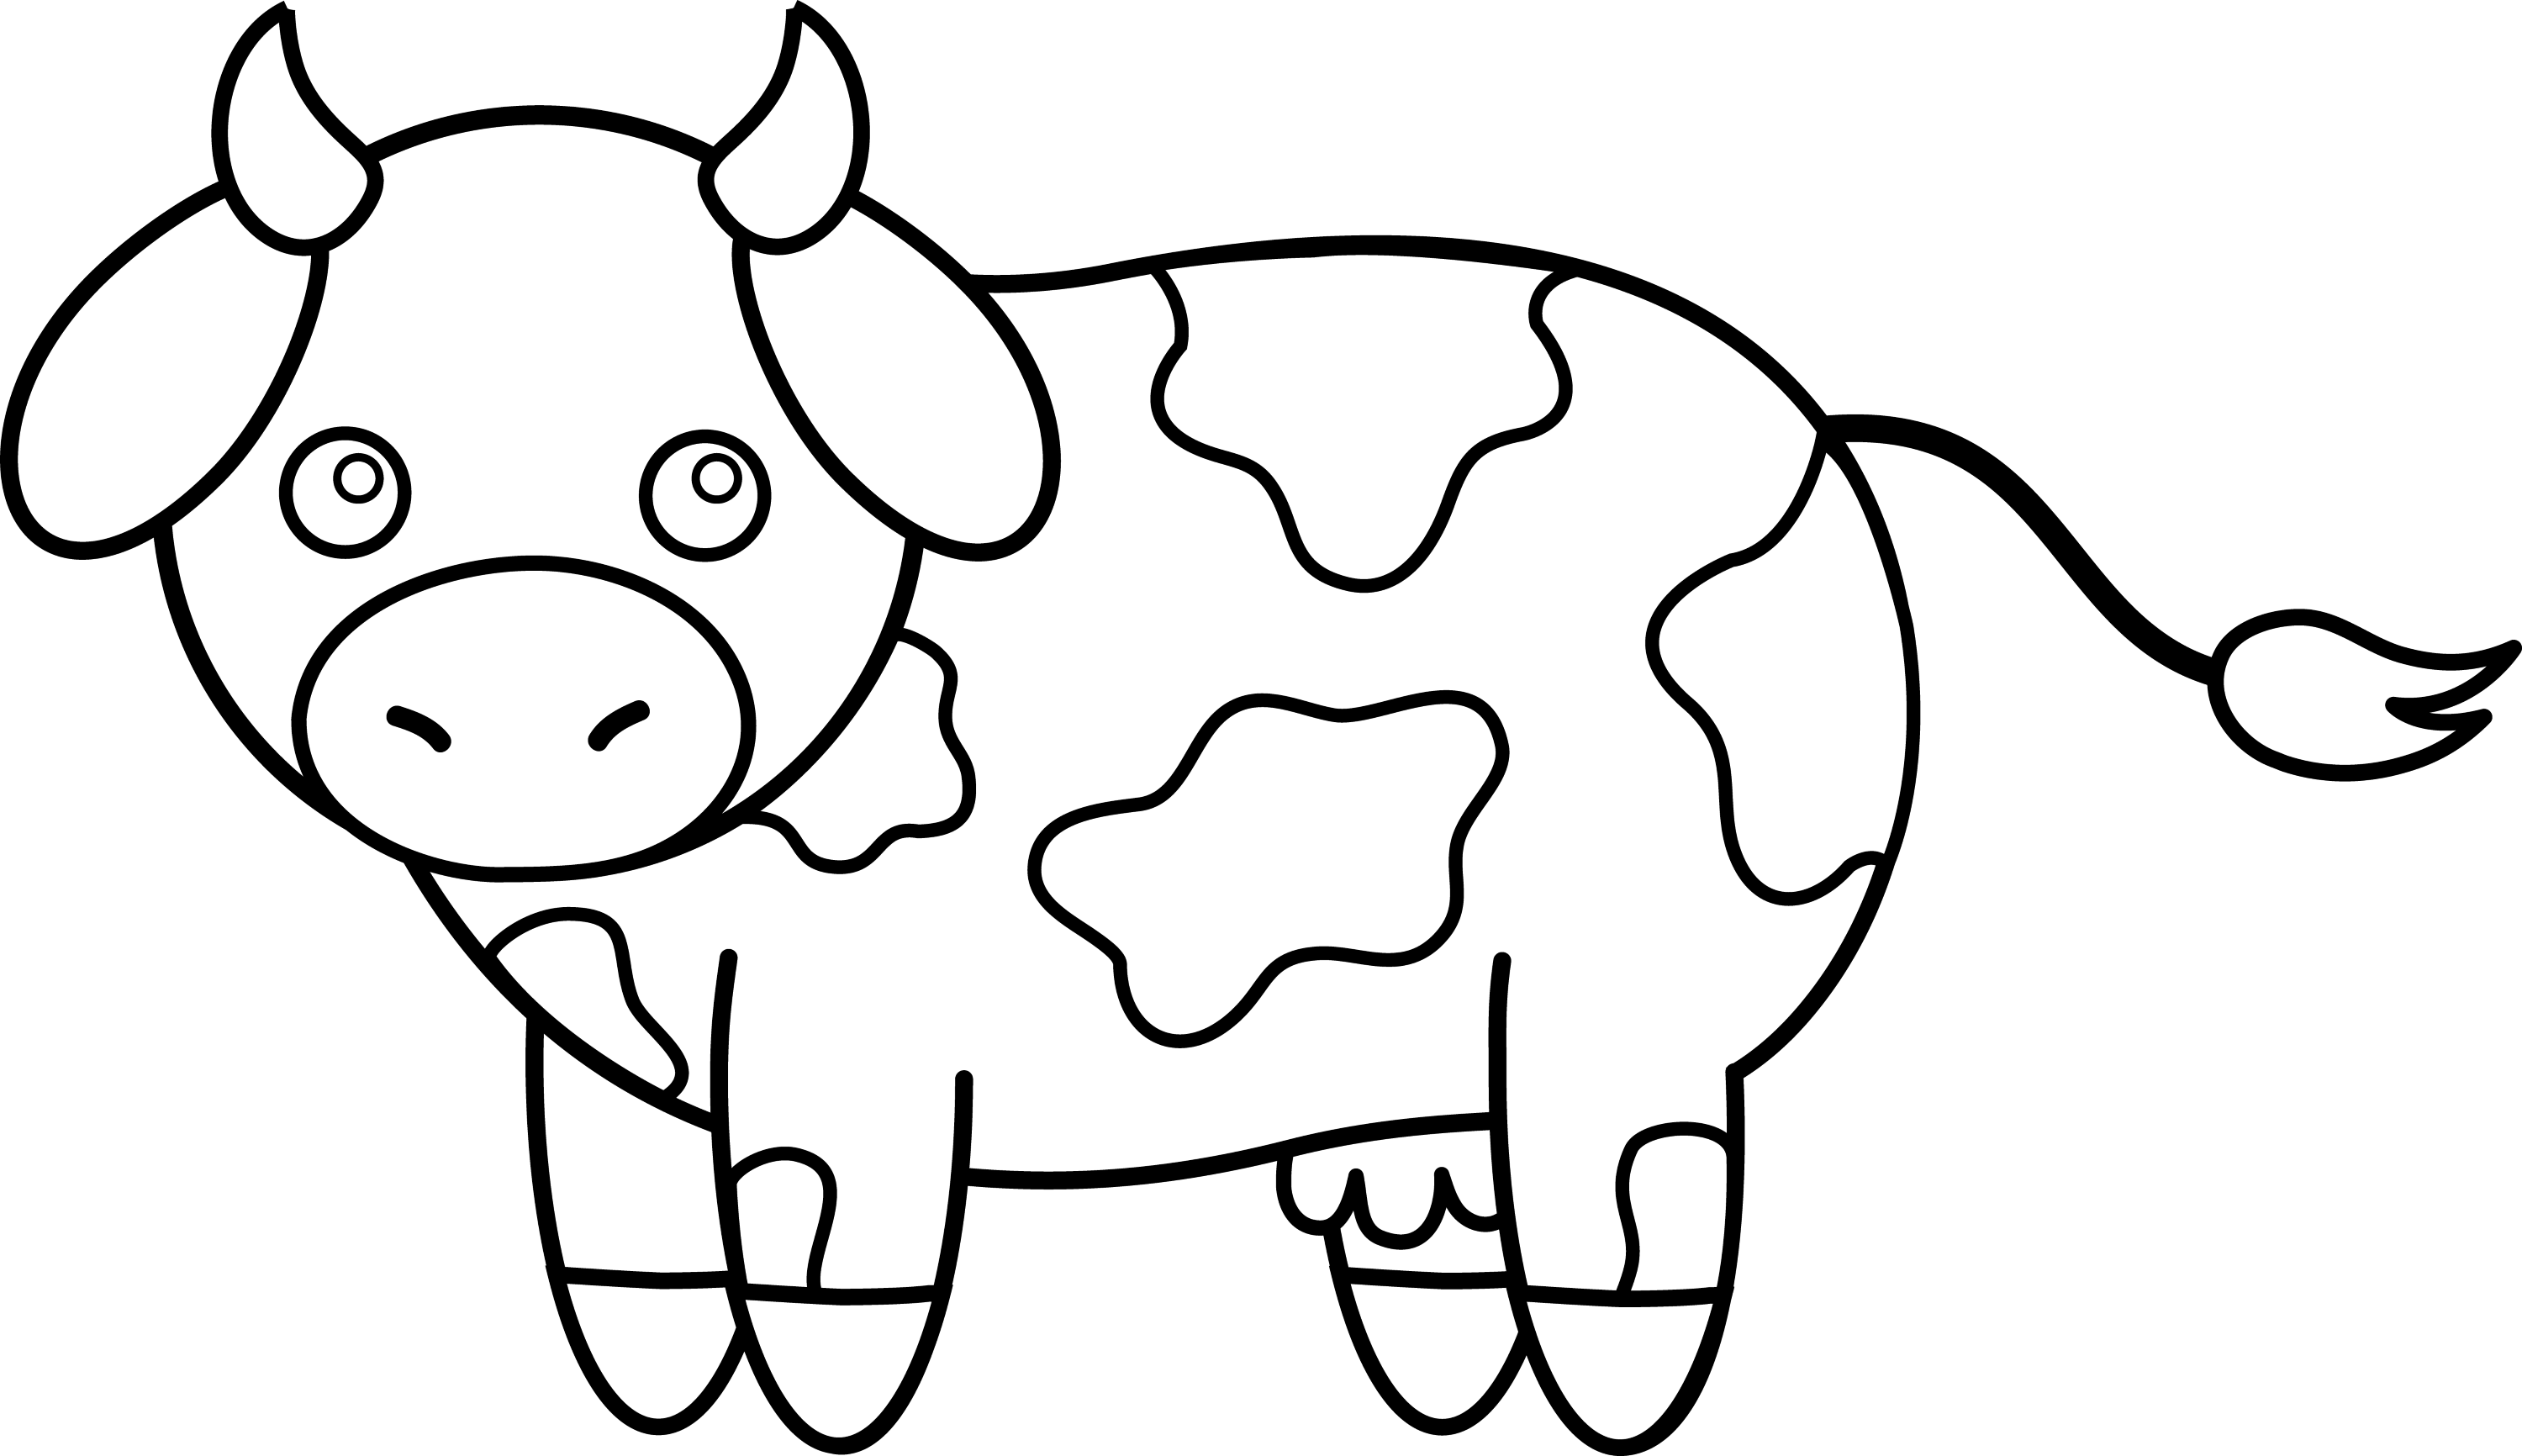 cow clipart simple - photo #36